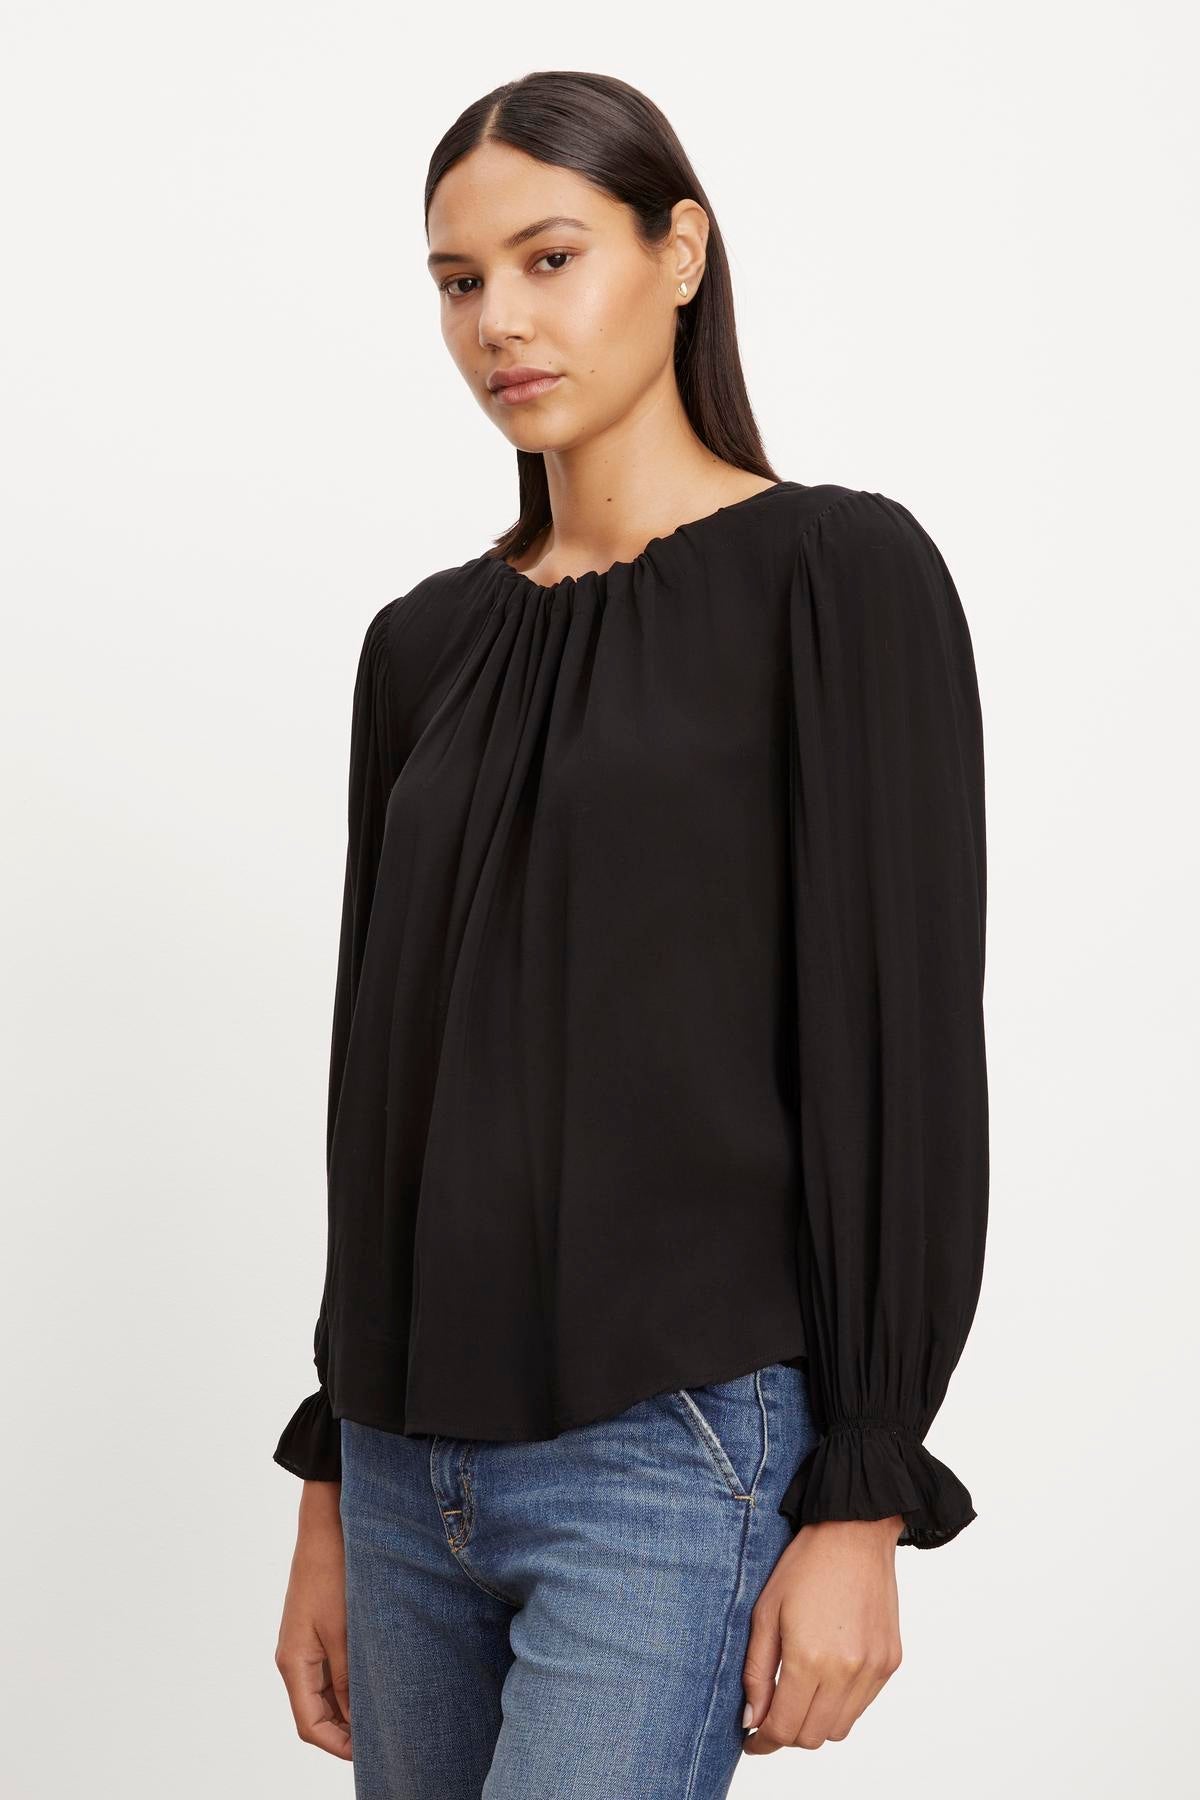   Luxurious BRISTOL NECK TIE TOP blouse made of rayon challis fabric, by Velvet by Graham & Spencer. 